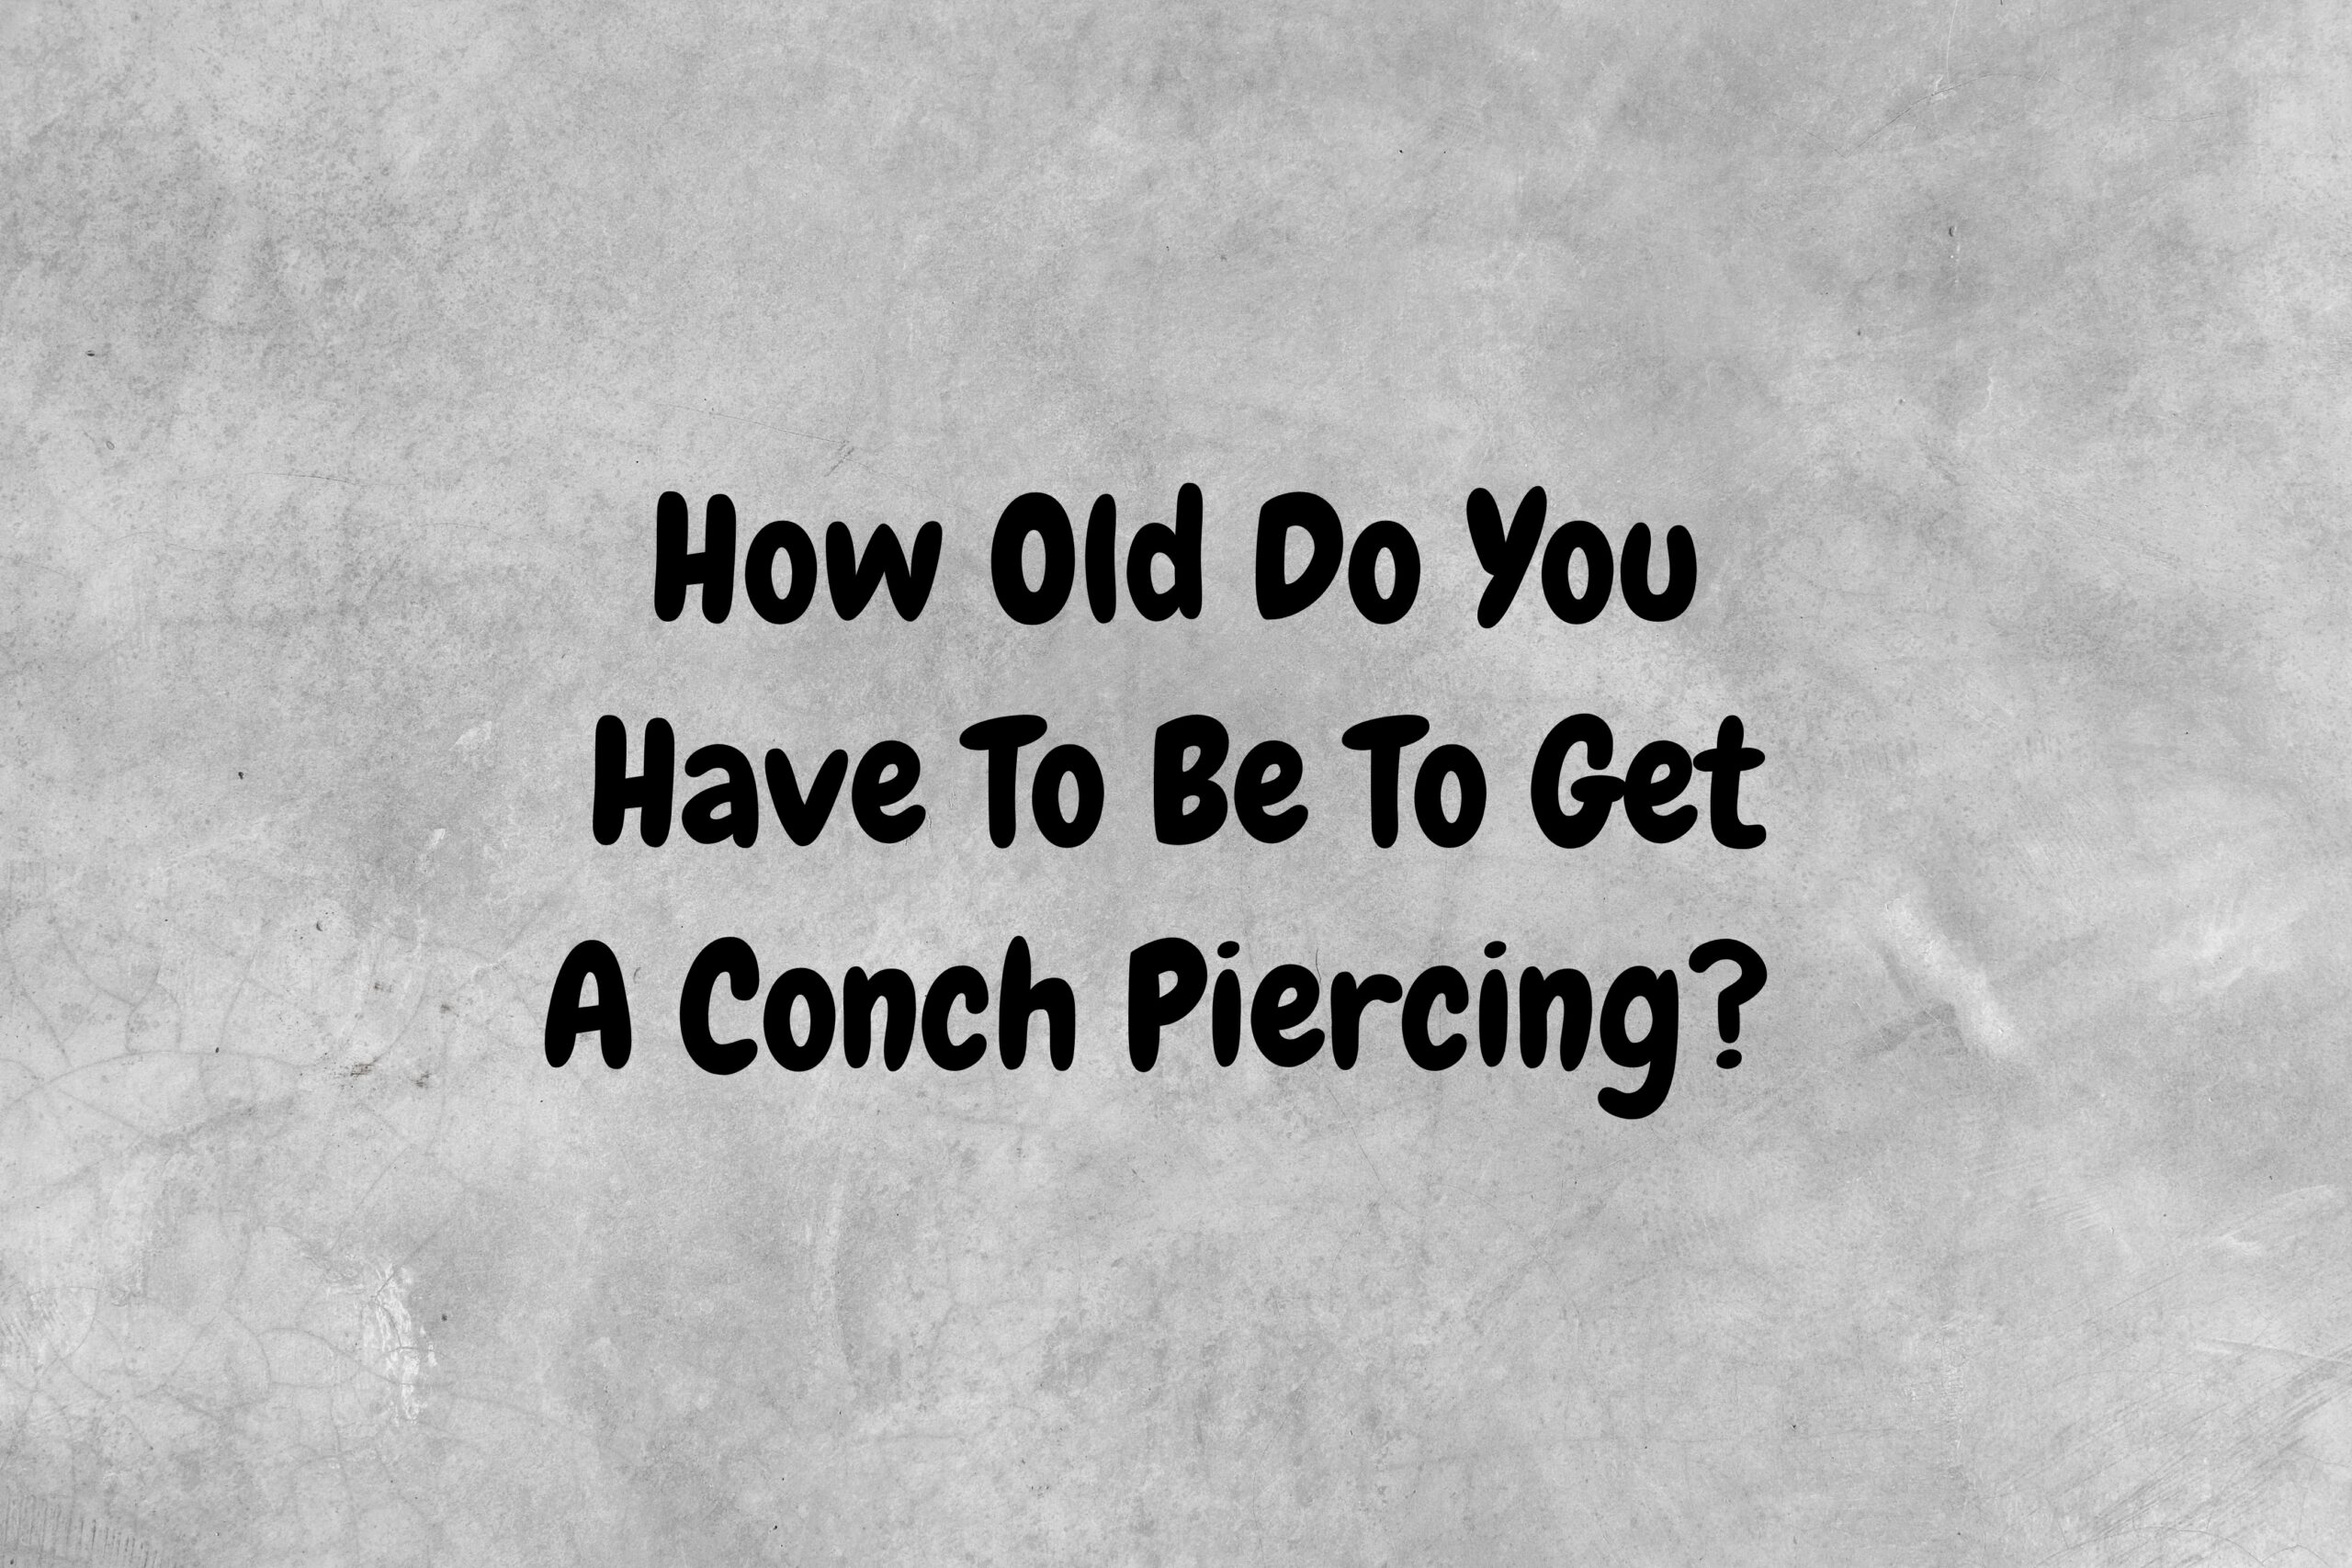 How Old Do You Have To Be To Get A Conch Piercing?